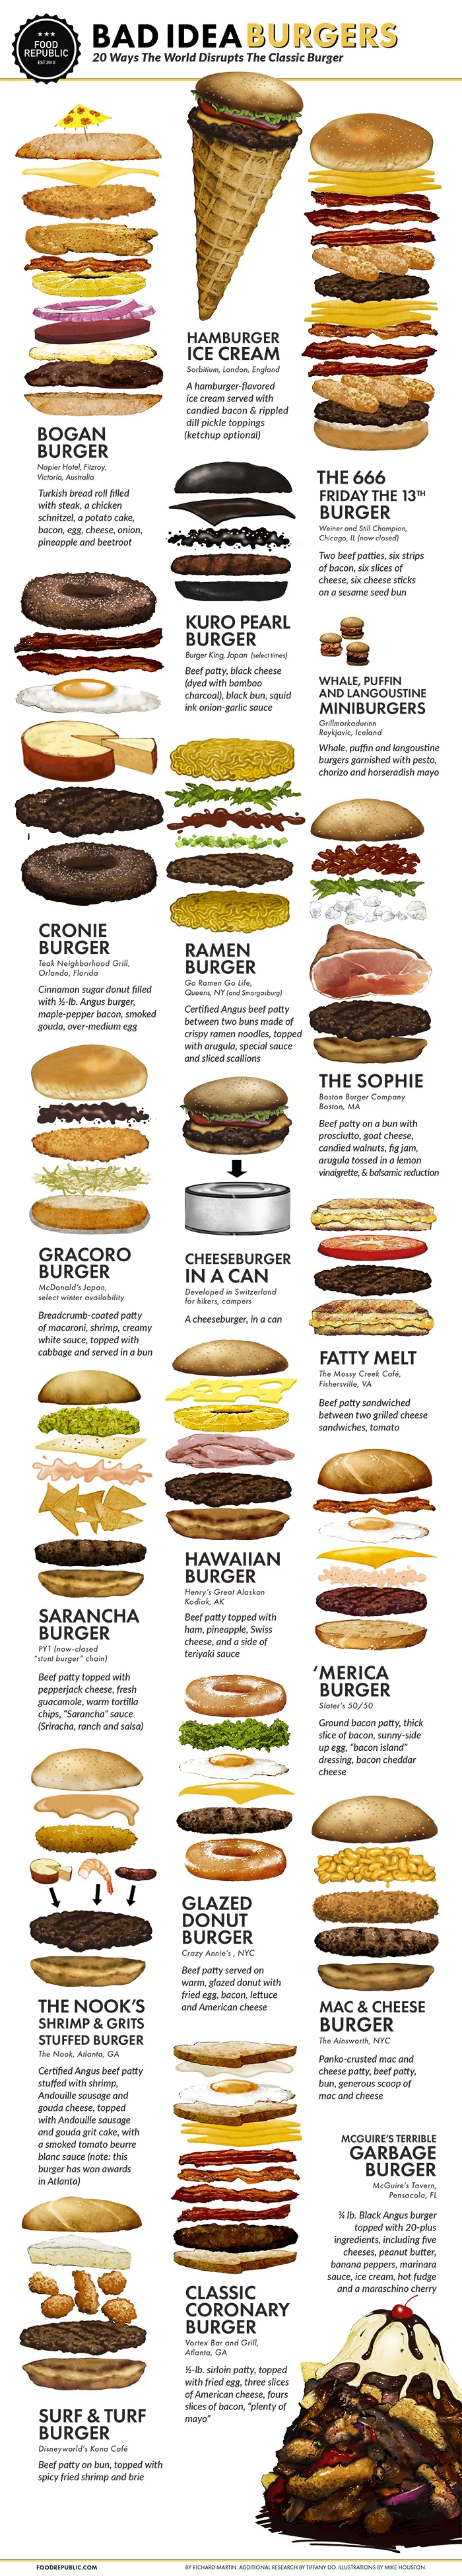 20 Gimmicky Burgers from Around the World